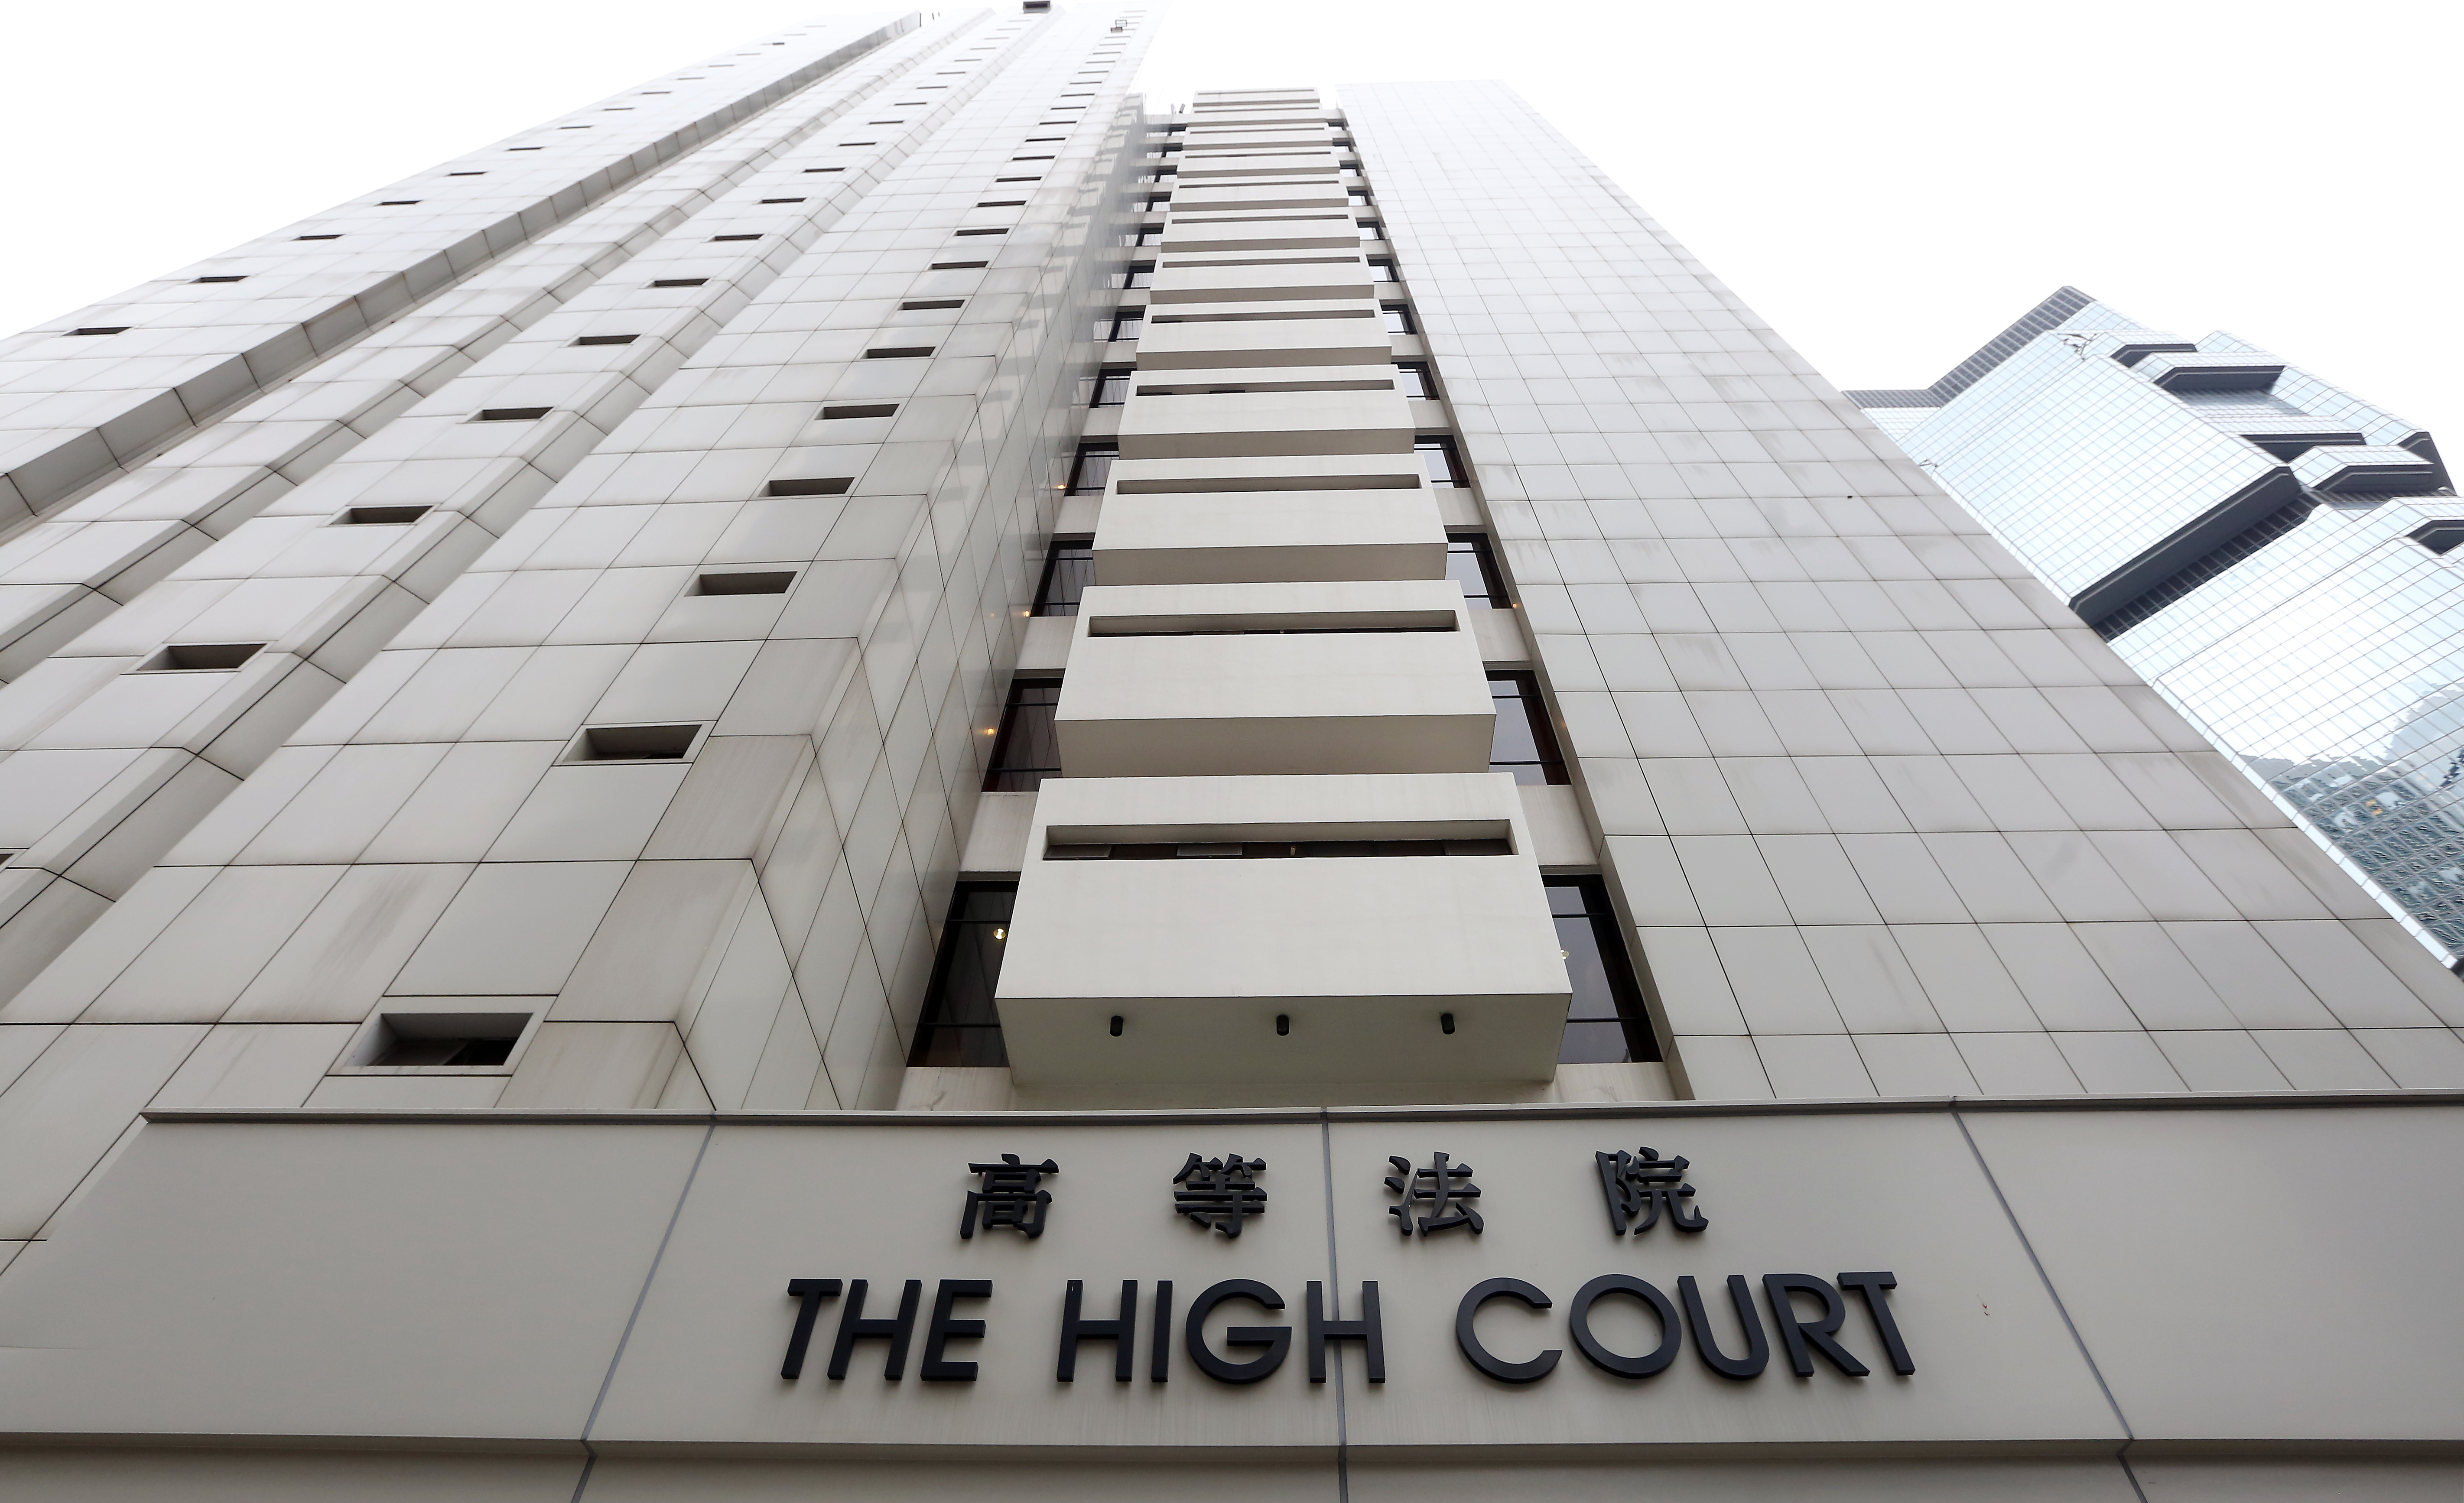 In these days of advocating public accountability, where no one is above the law and ordinary citizens have freedom of expression, a court watch programme is becoming an increasing popular model. Photo: Sam Tsang